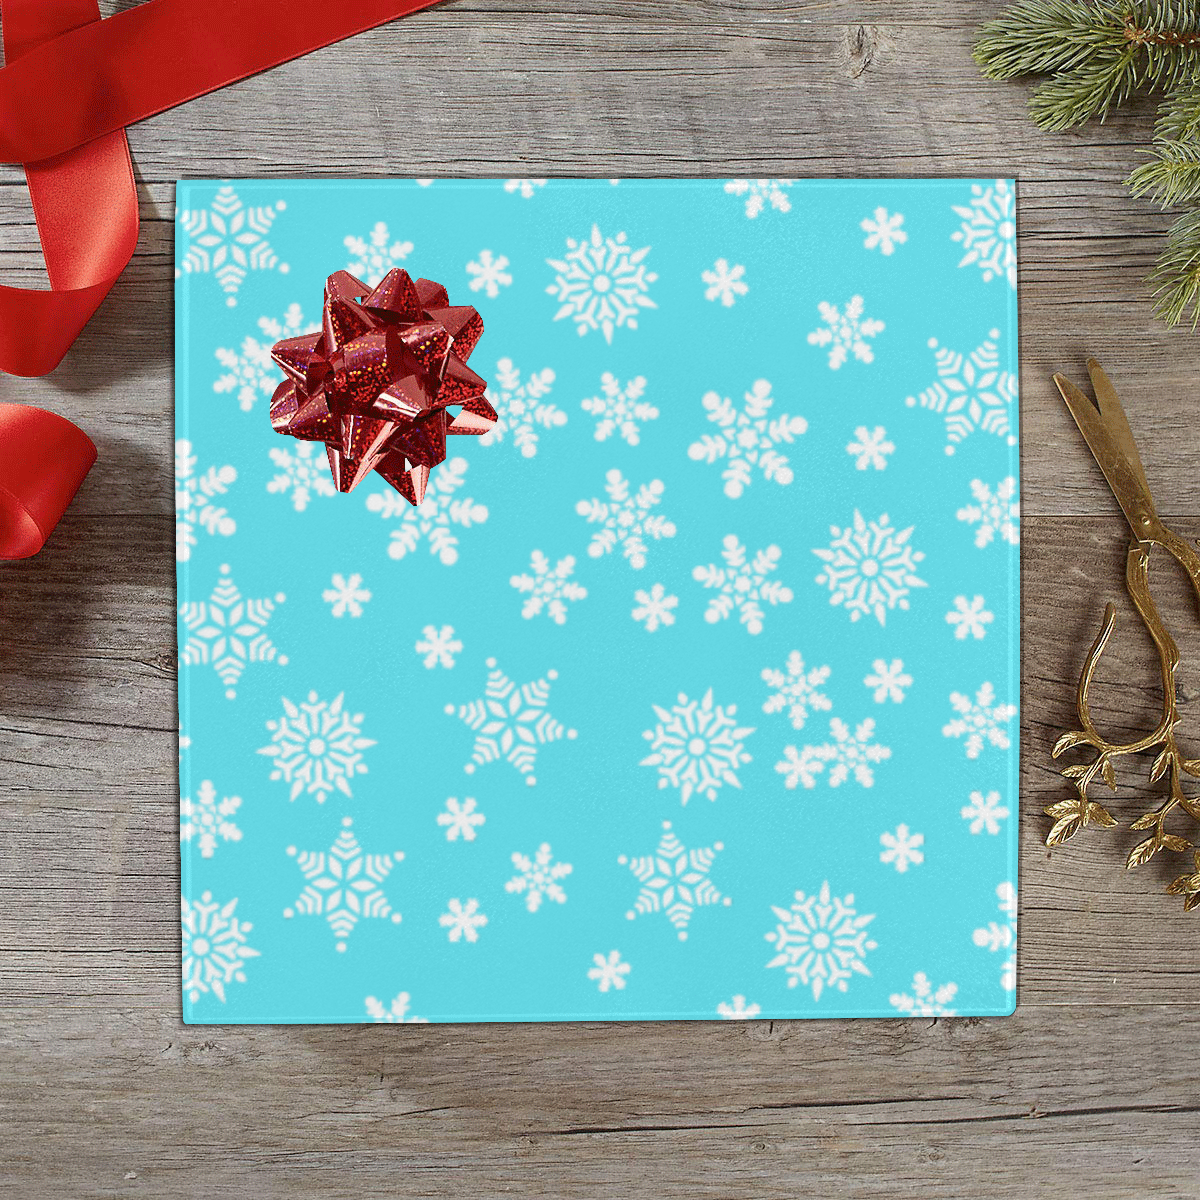 Christmas White Snowflakes on Turquoise Gift Wrapping Paper 58"x 23" (5 Rolls)